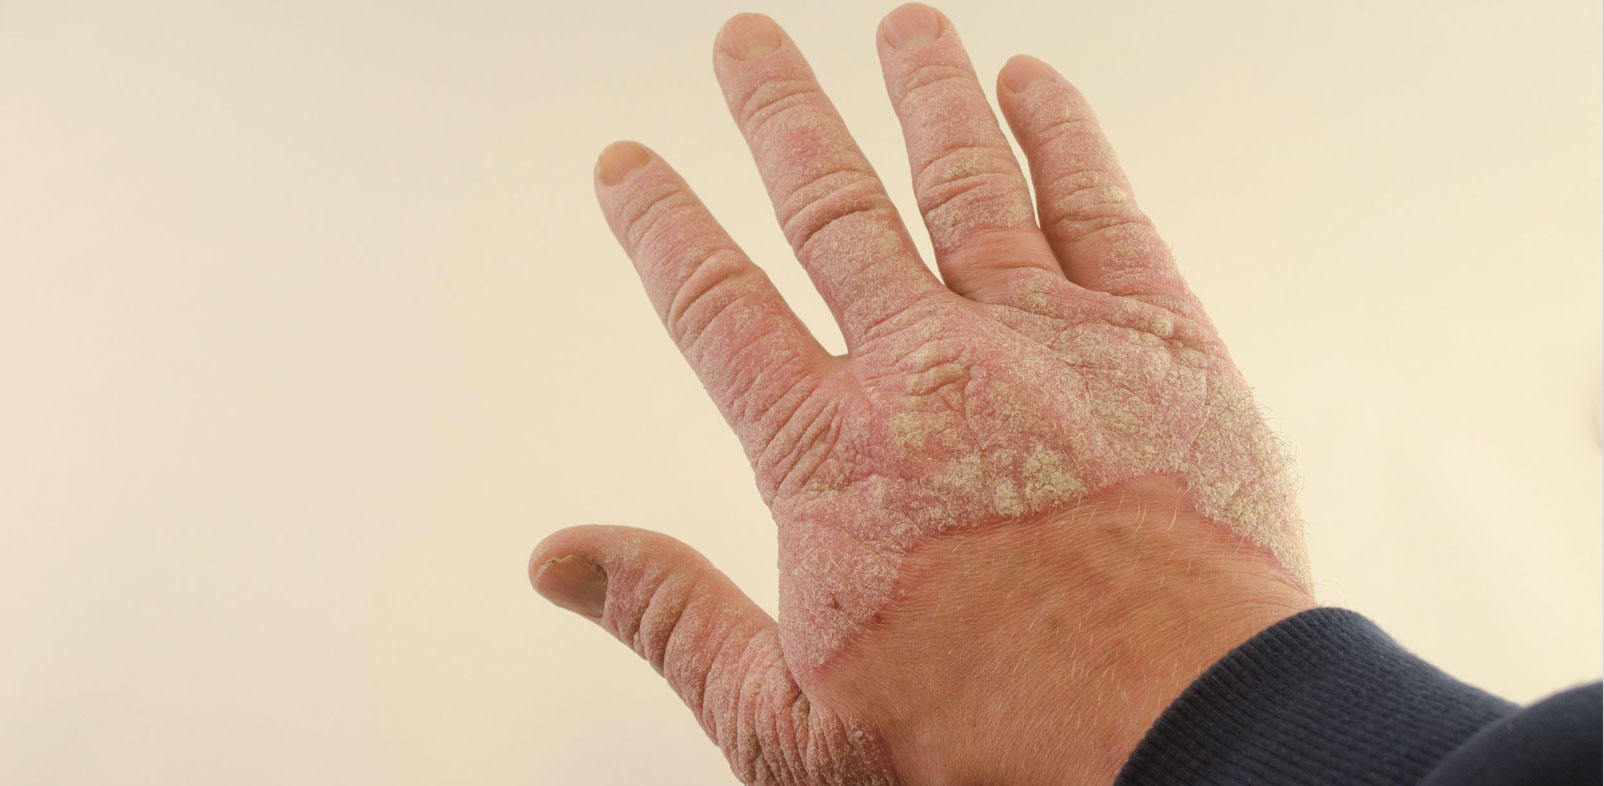 Psoriasis is a Deadly Skin Disease